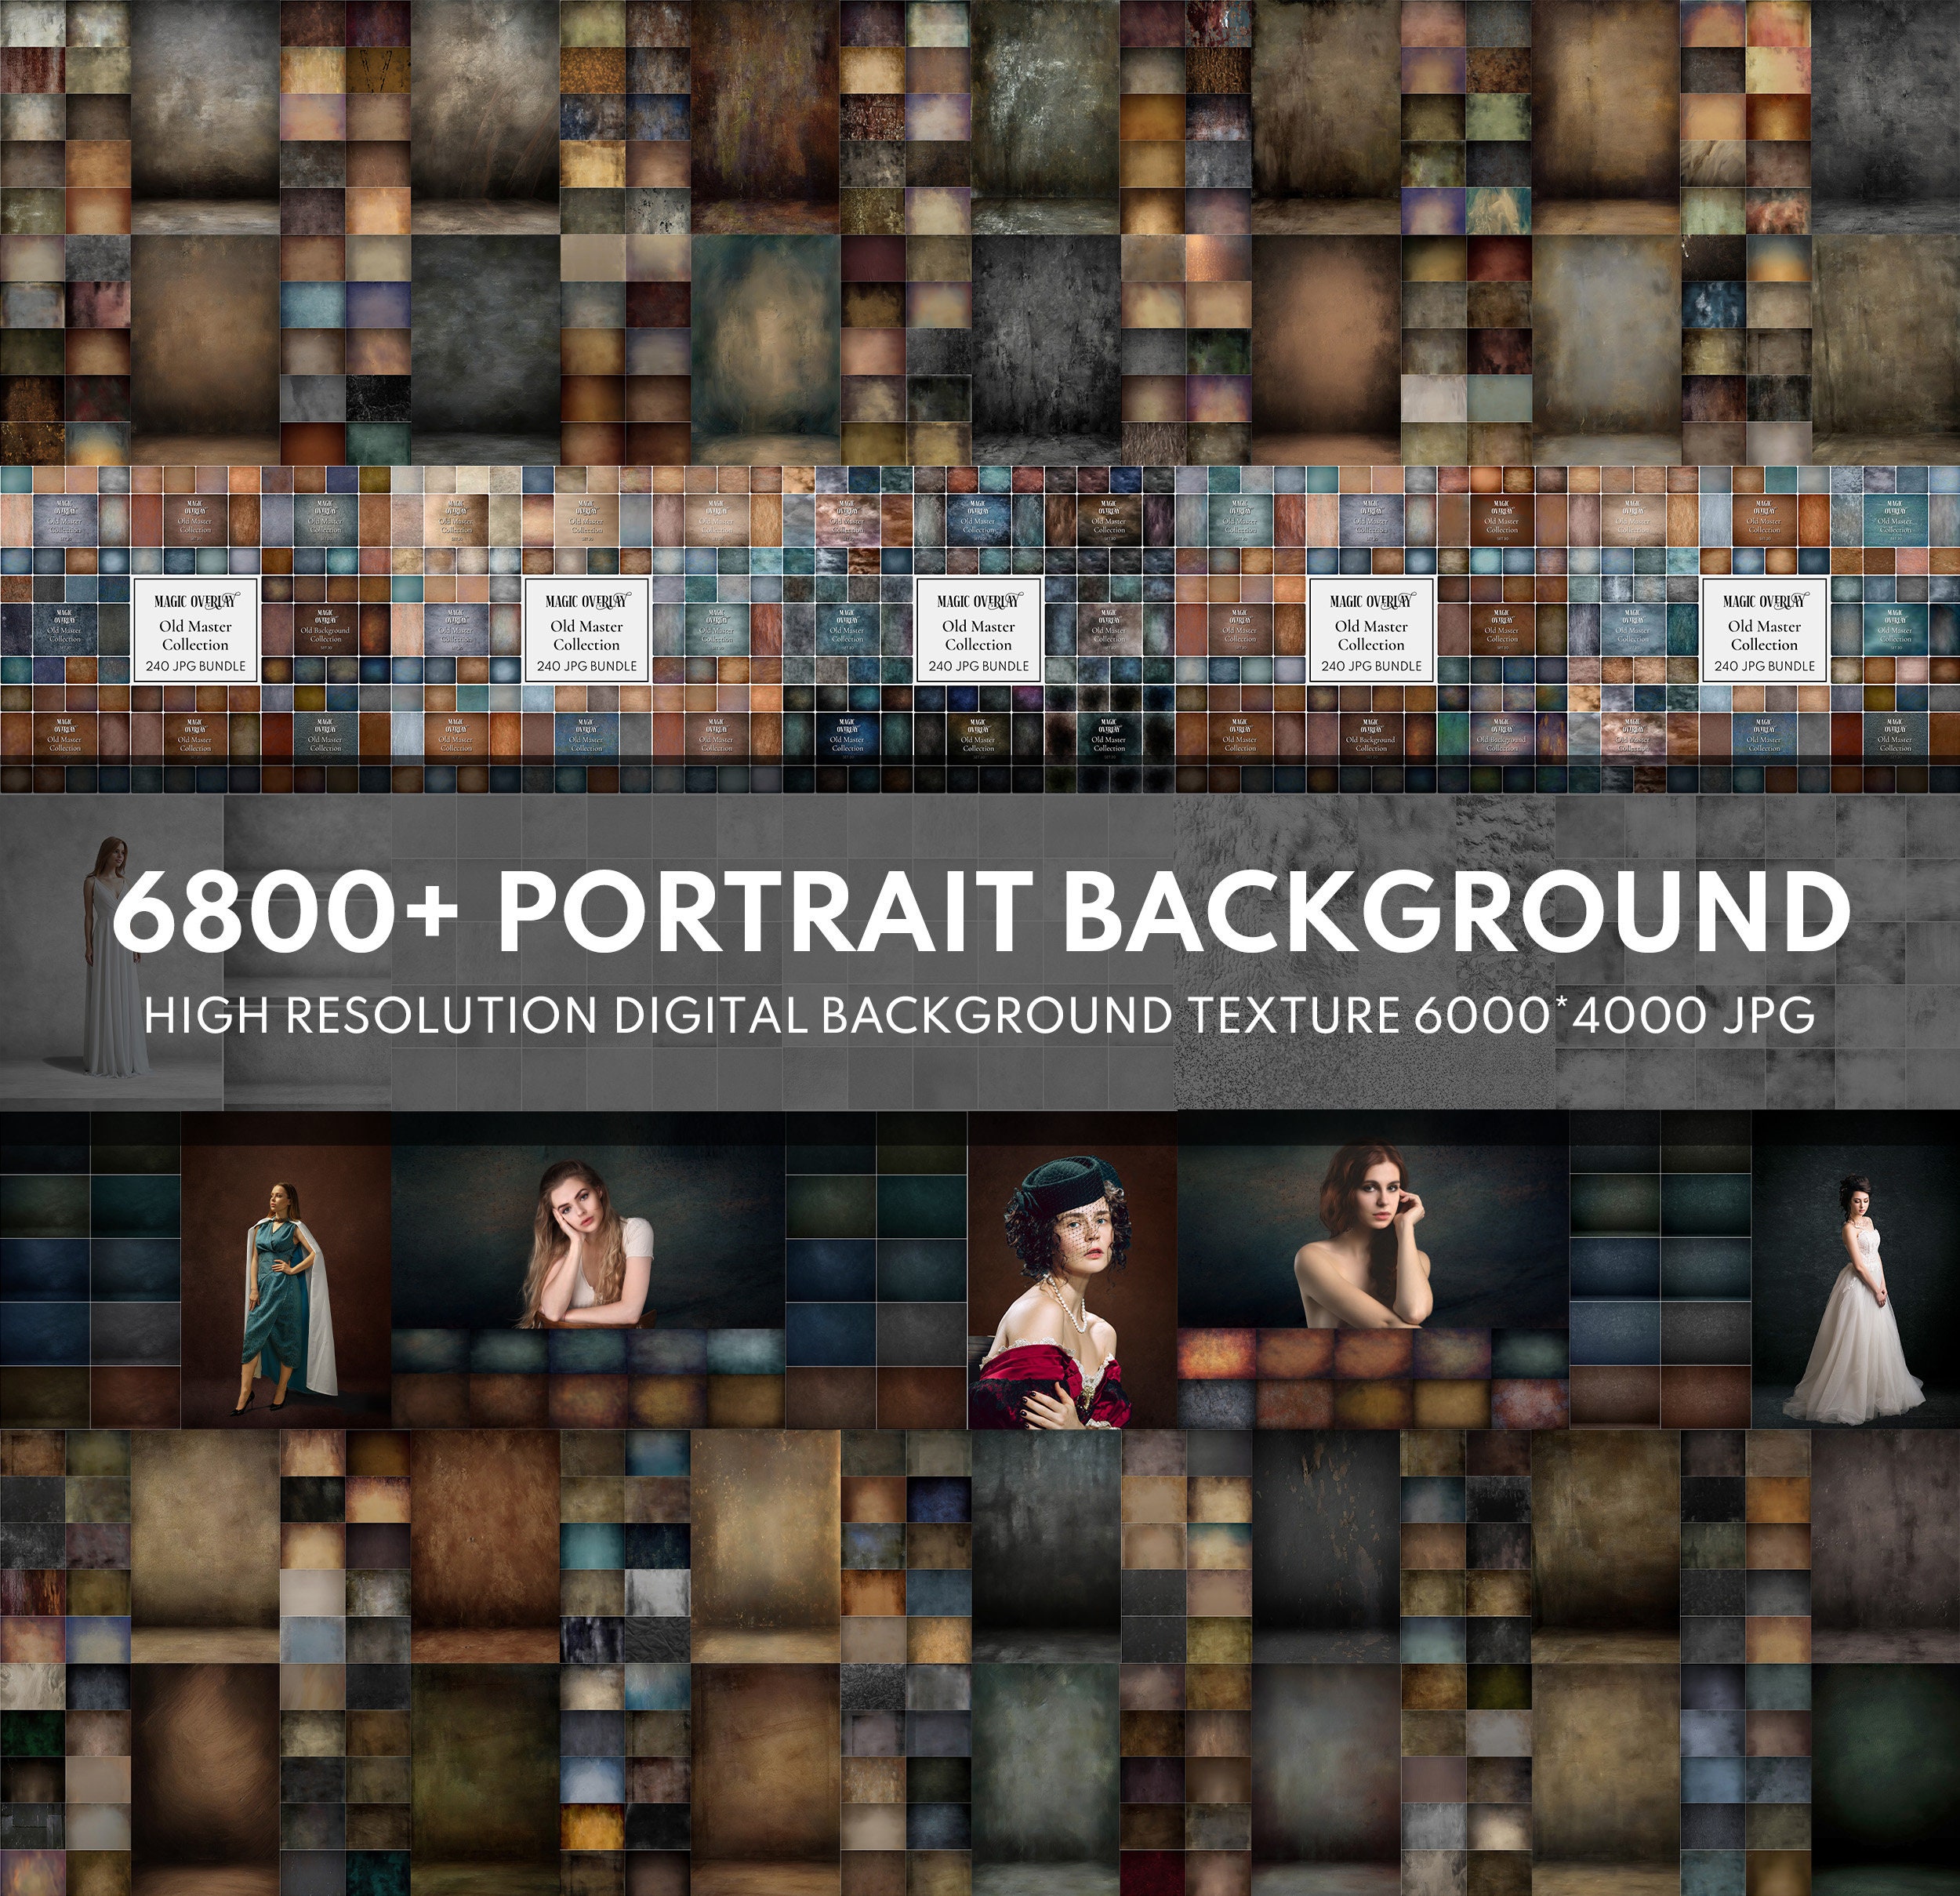 250+ Perfect Backgrounds [Free Download]